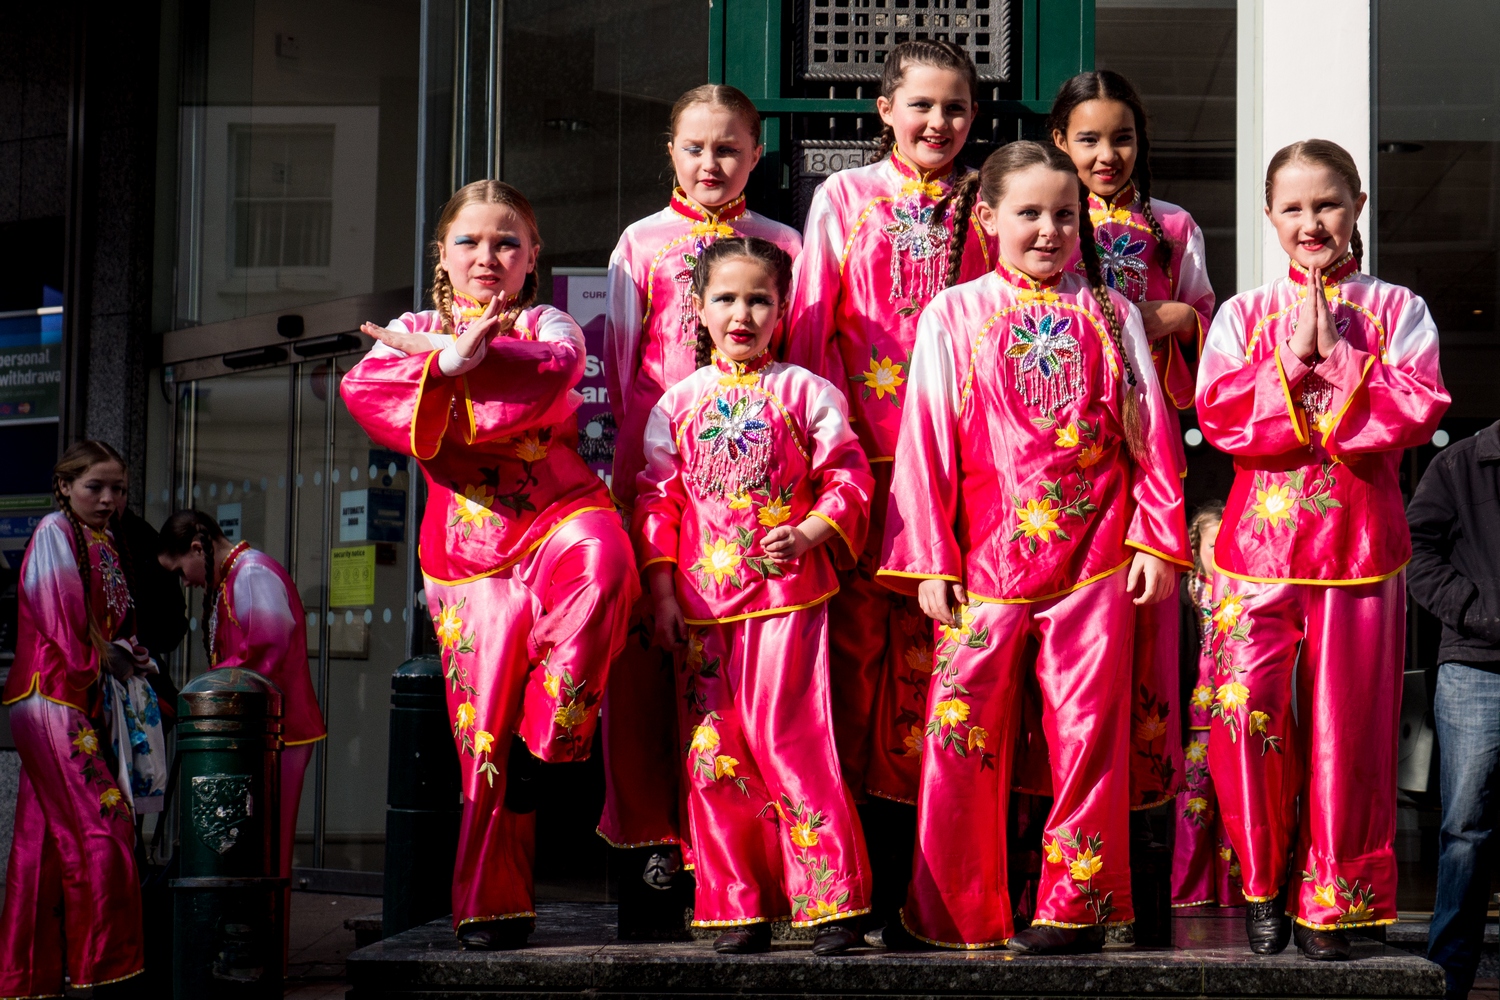 Michael Goodes: Chatham's Chinese New Year Parade